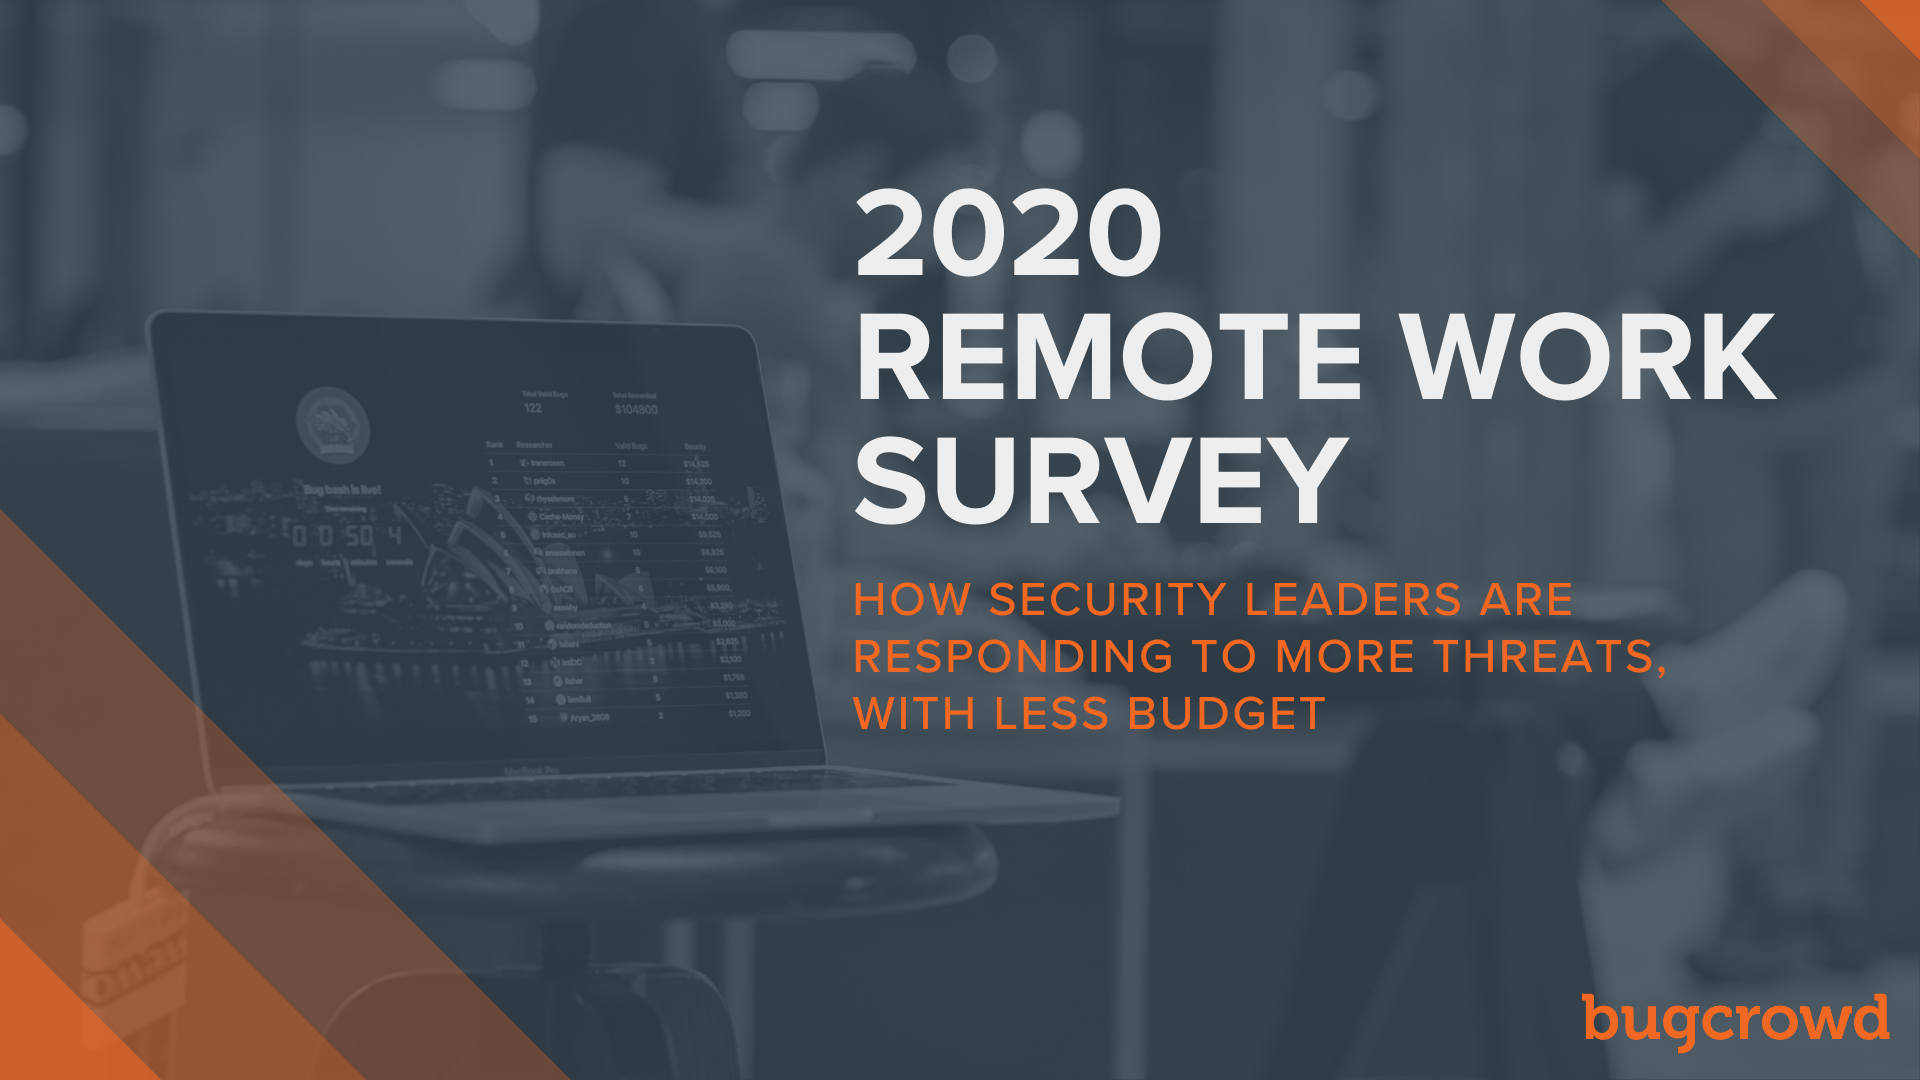 2020 Remote Work Survey: How Security Leaders Are Responding to More Threats, With Less Budget